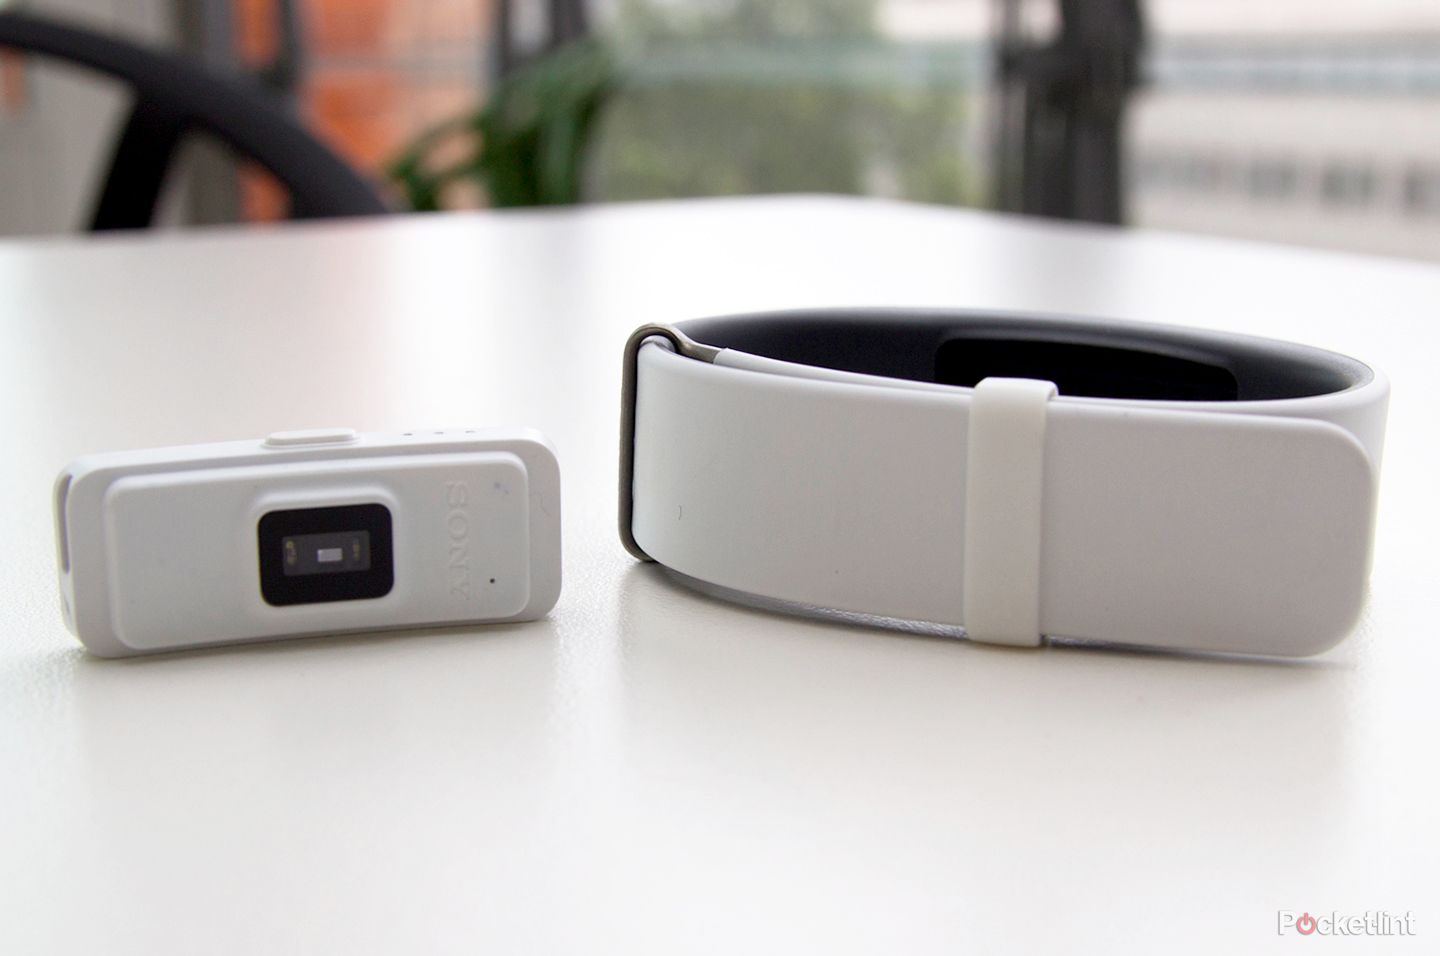 sony smartband 2 review image 1